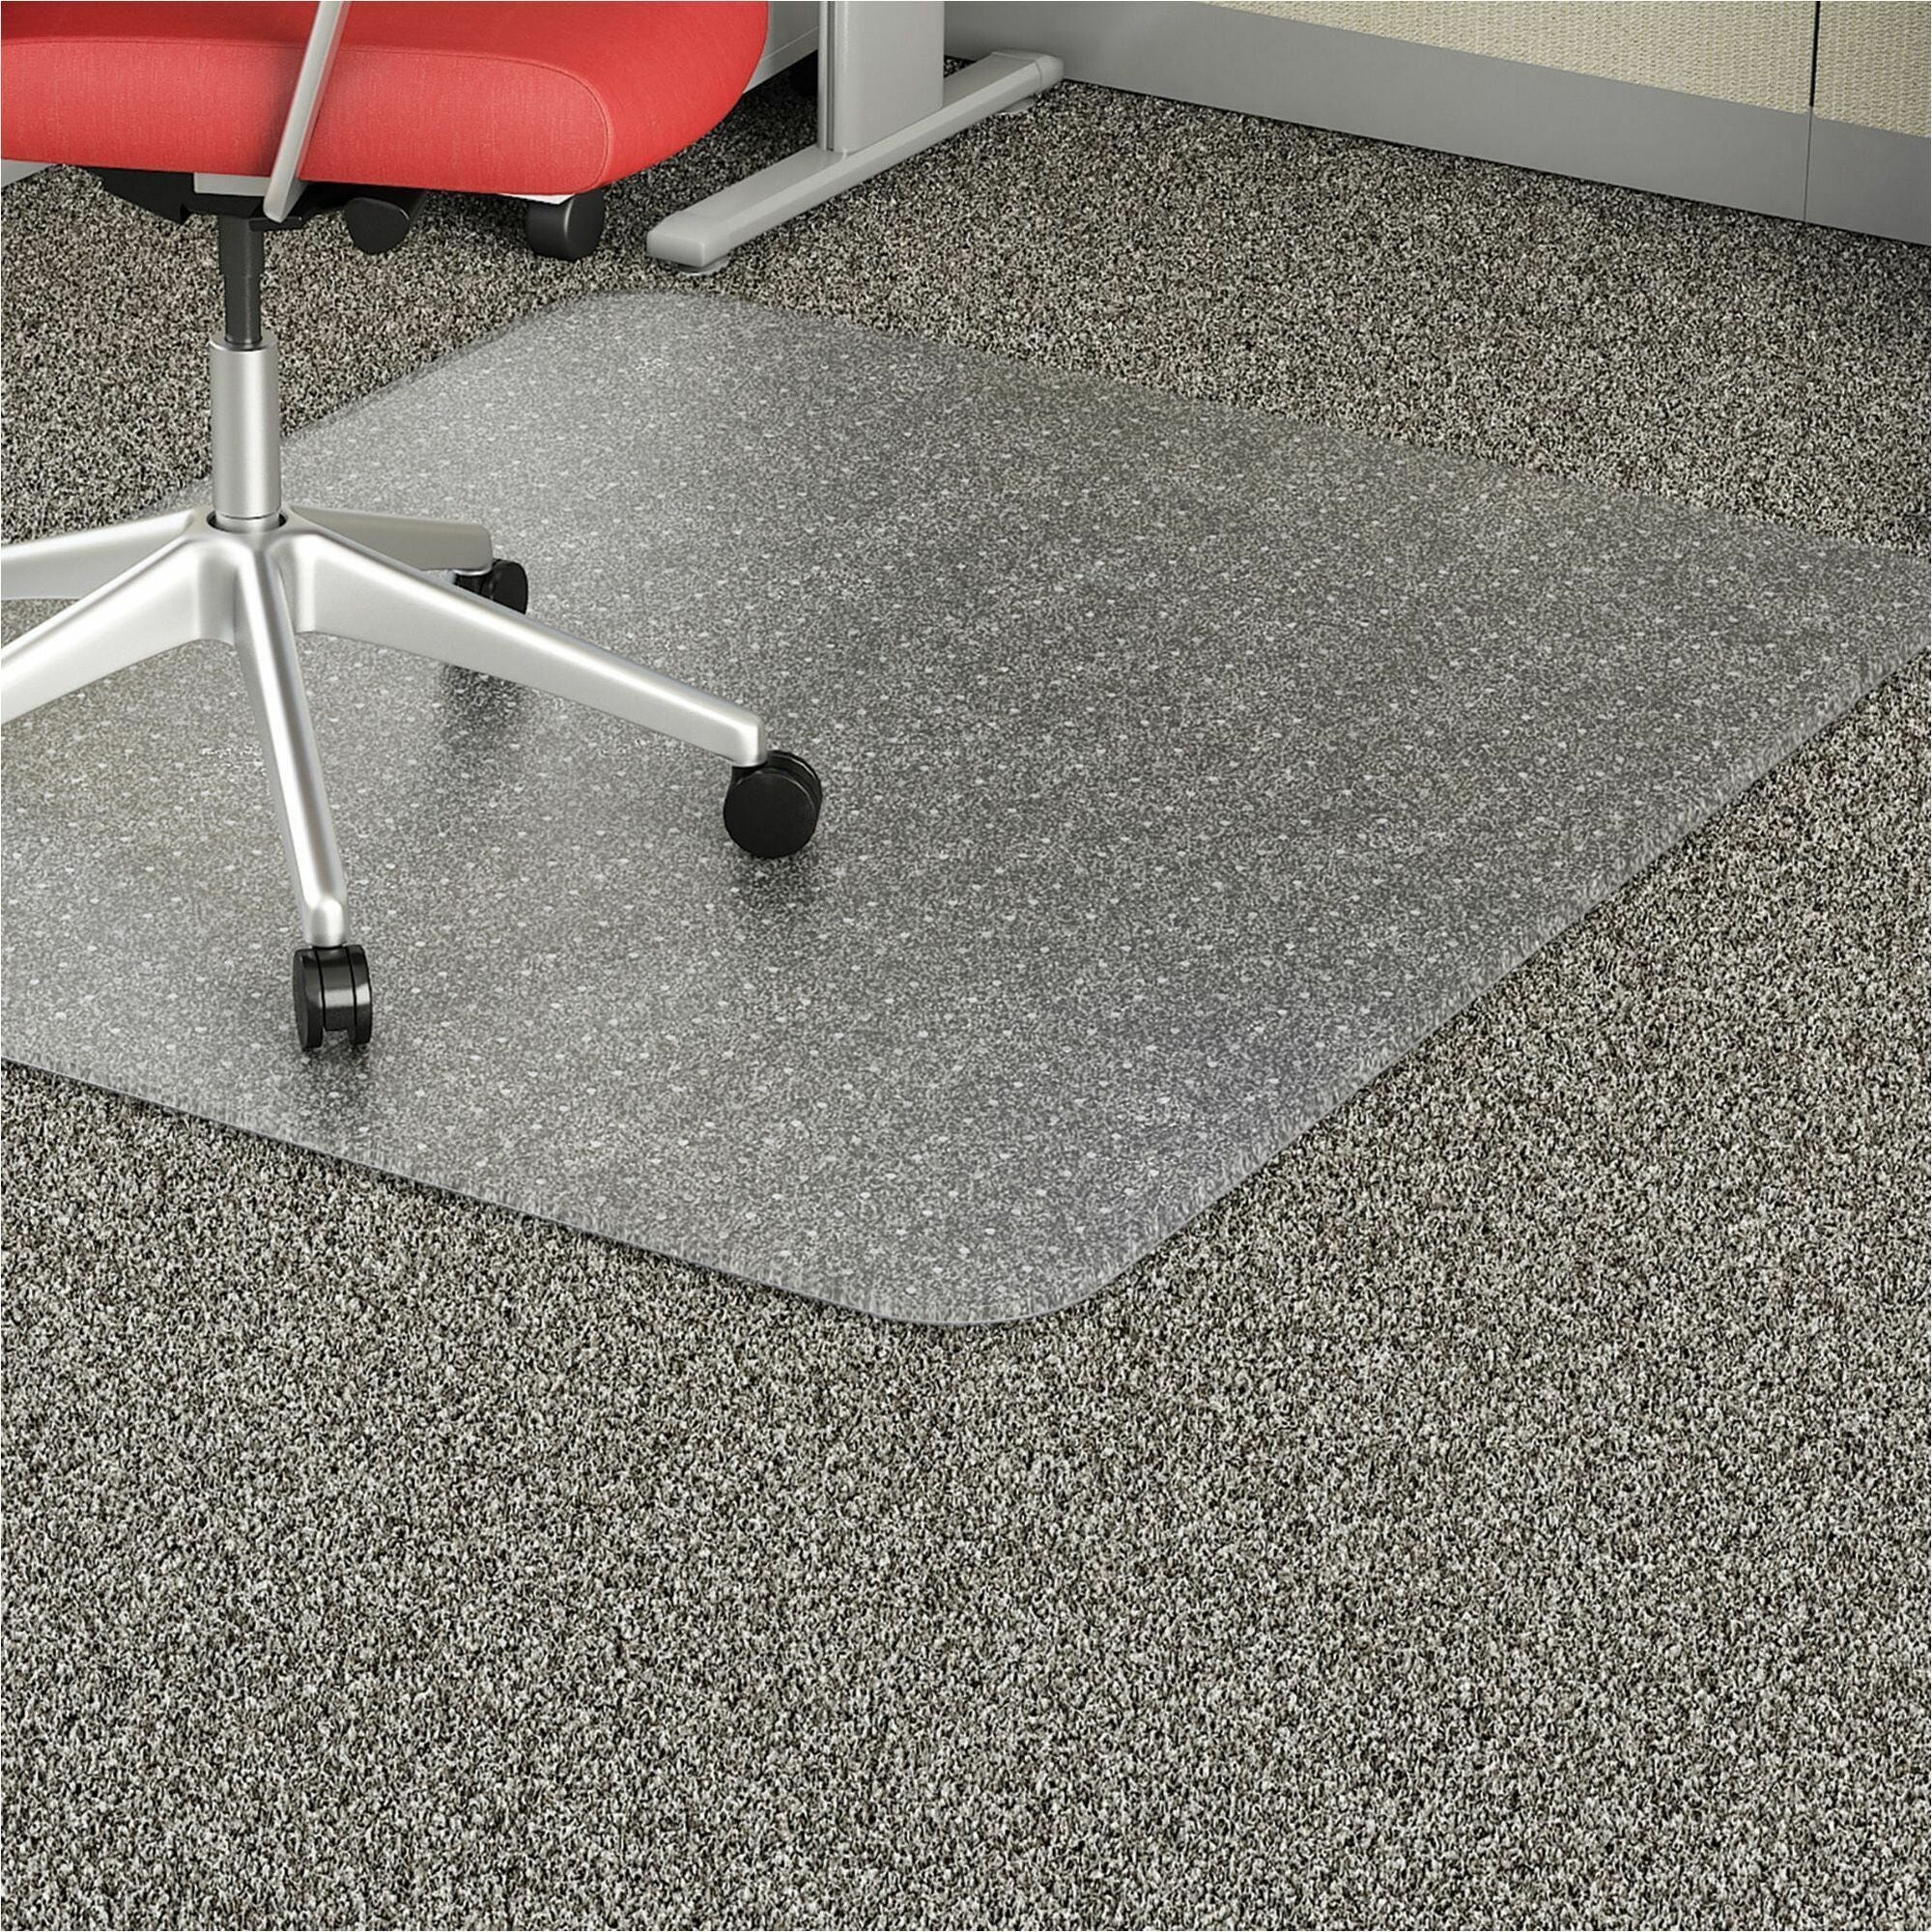 Lorell Low-Pile Economy Chairmat - Carpeted Floor - 60" Length x 46" Width x 0.095" Thickness - Rectangular - Vinyl - Clear - 1Each - 